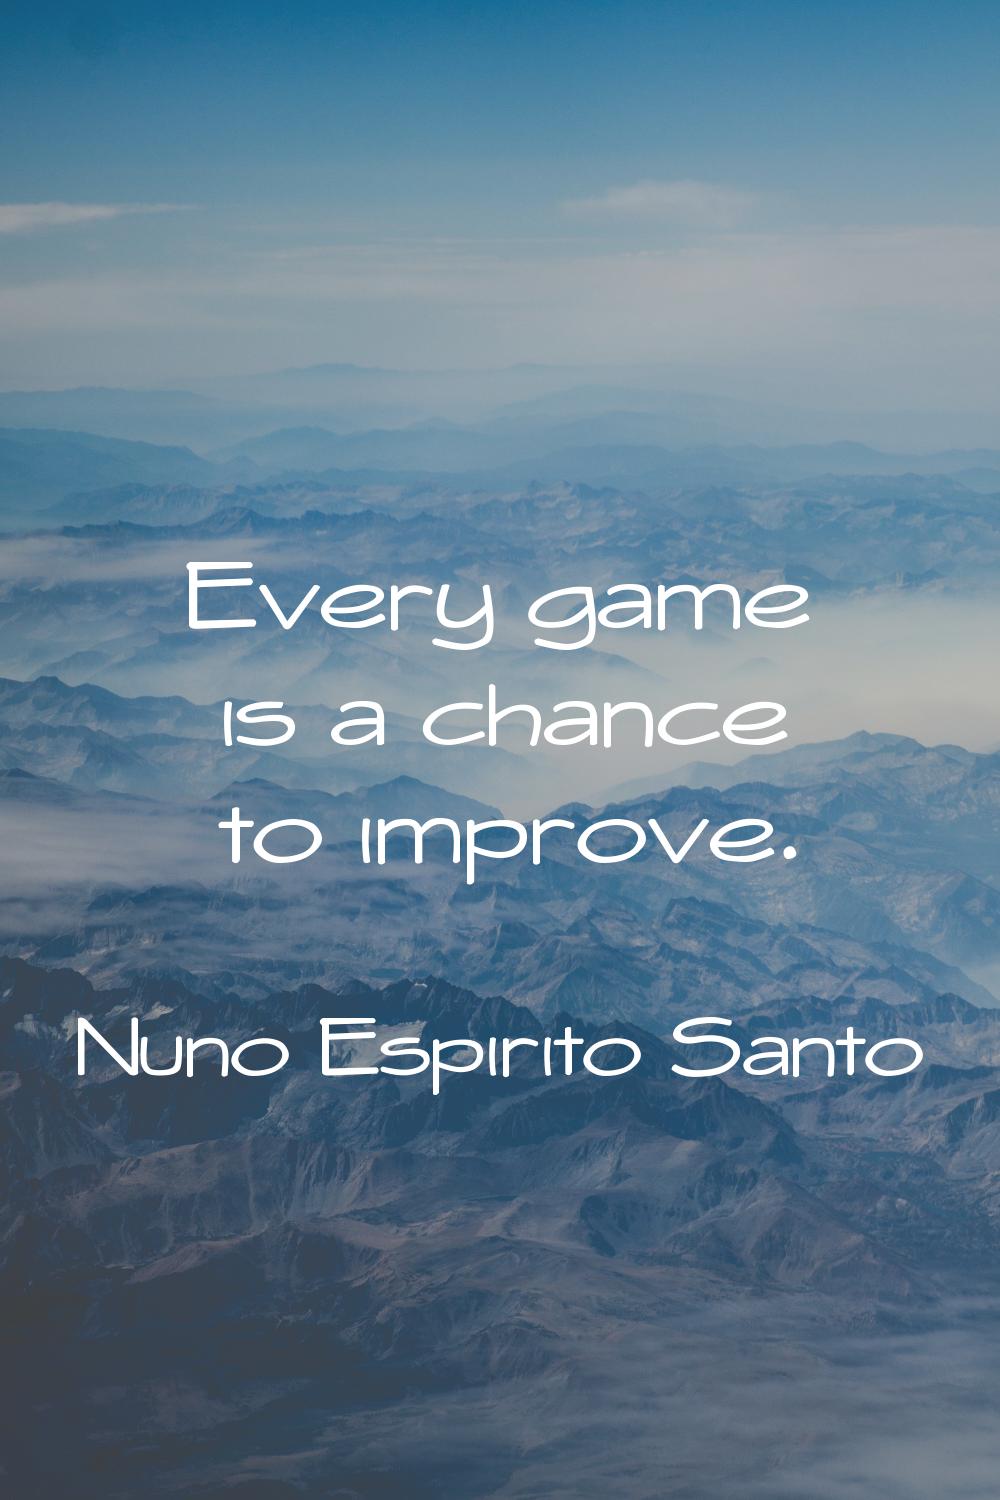 Every game is a chance to improve.